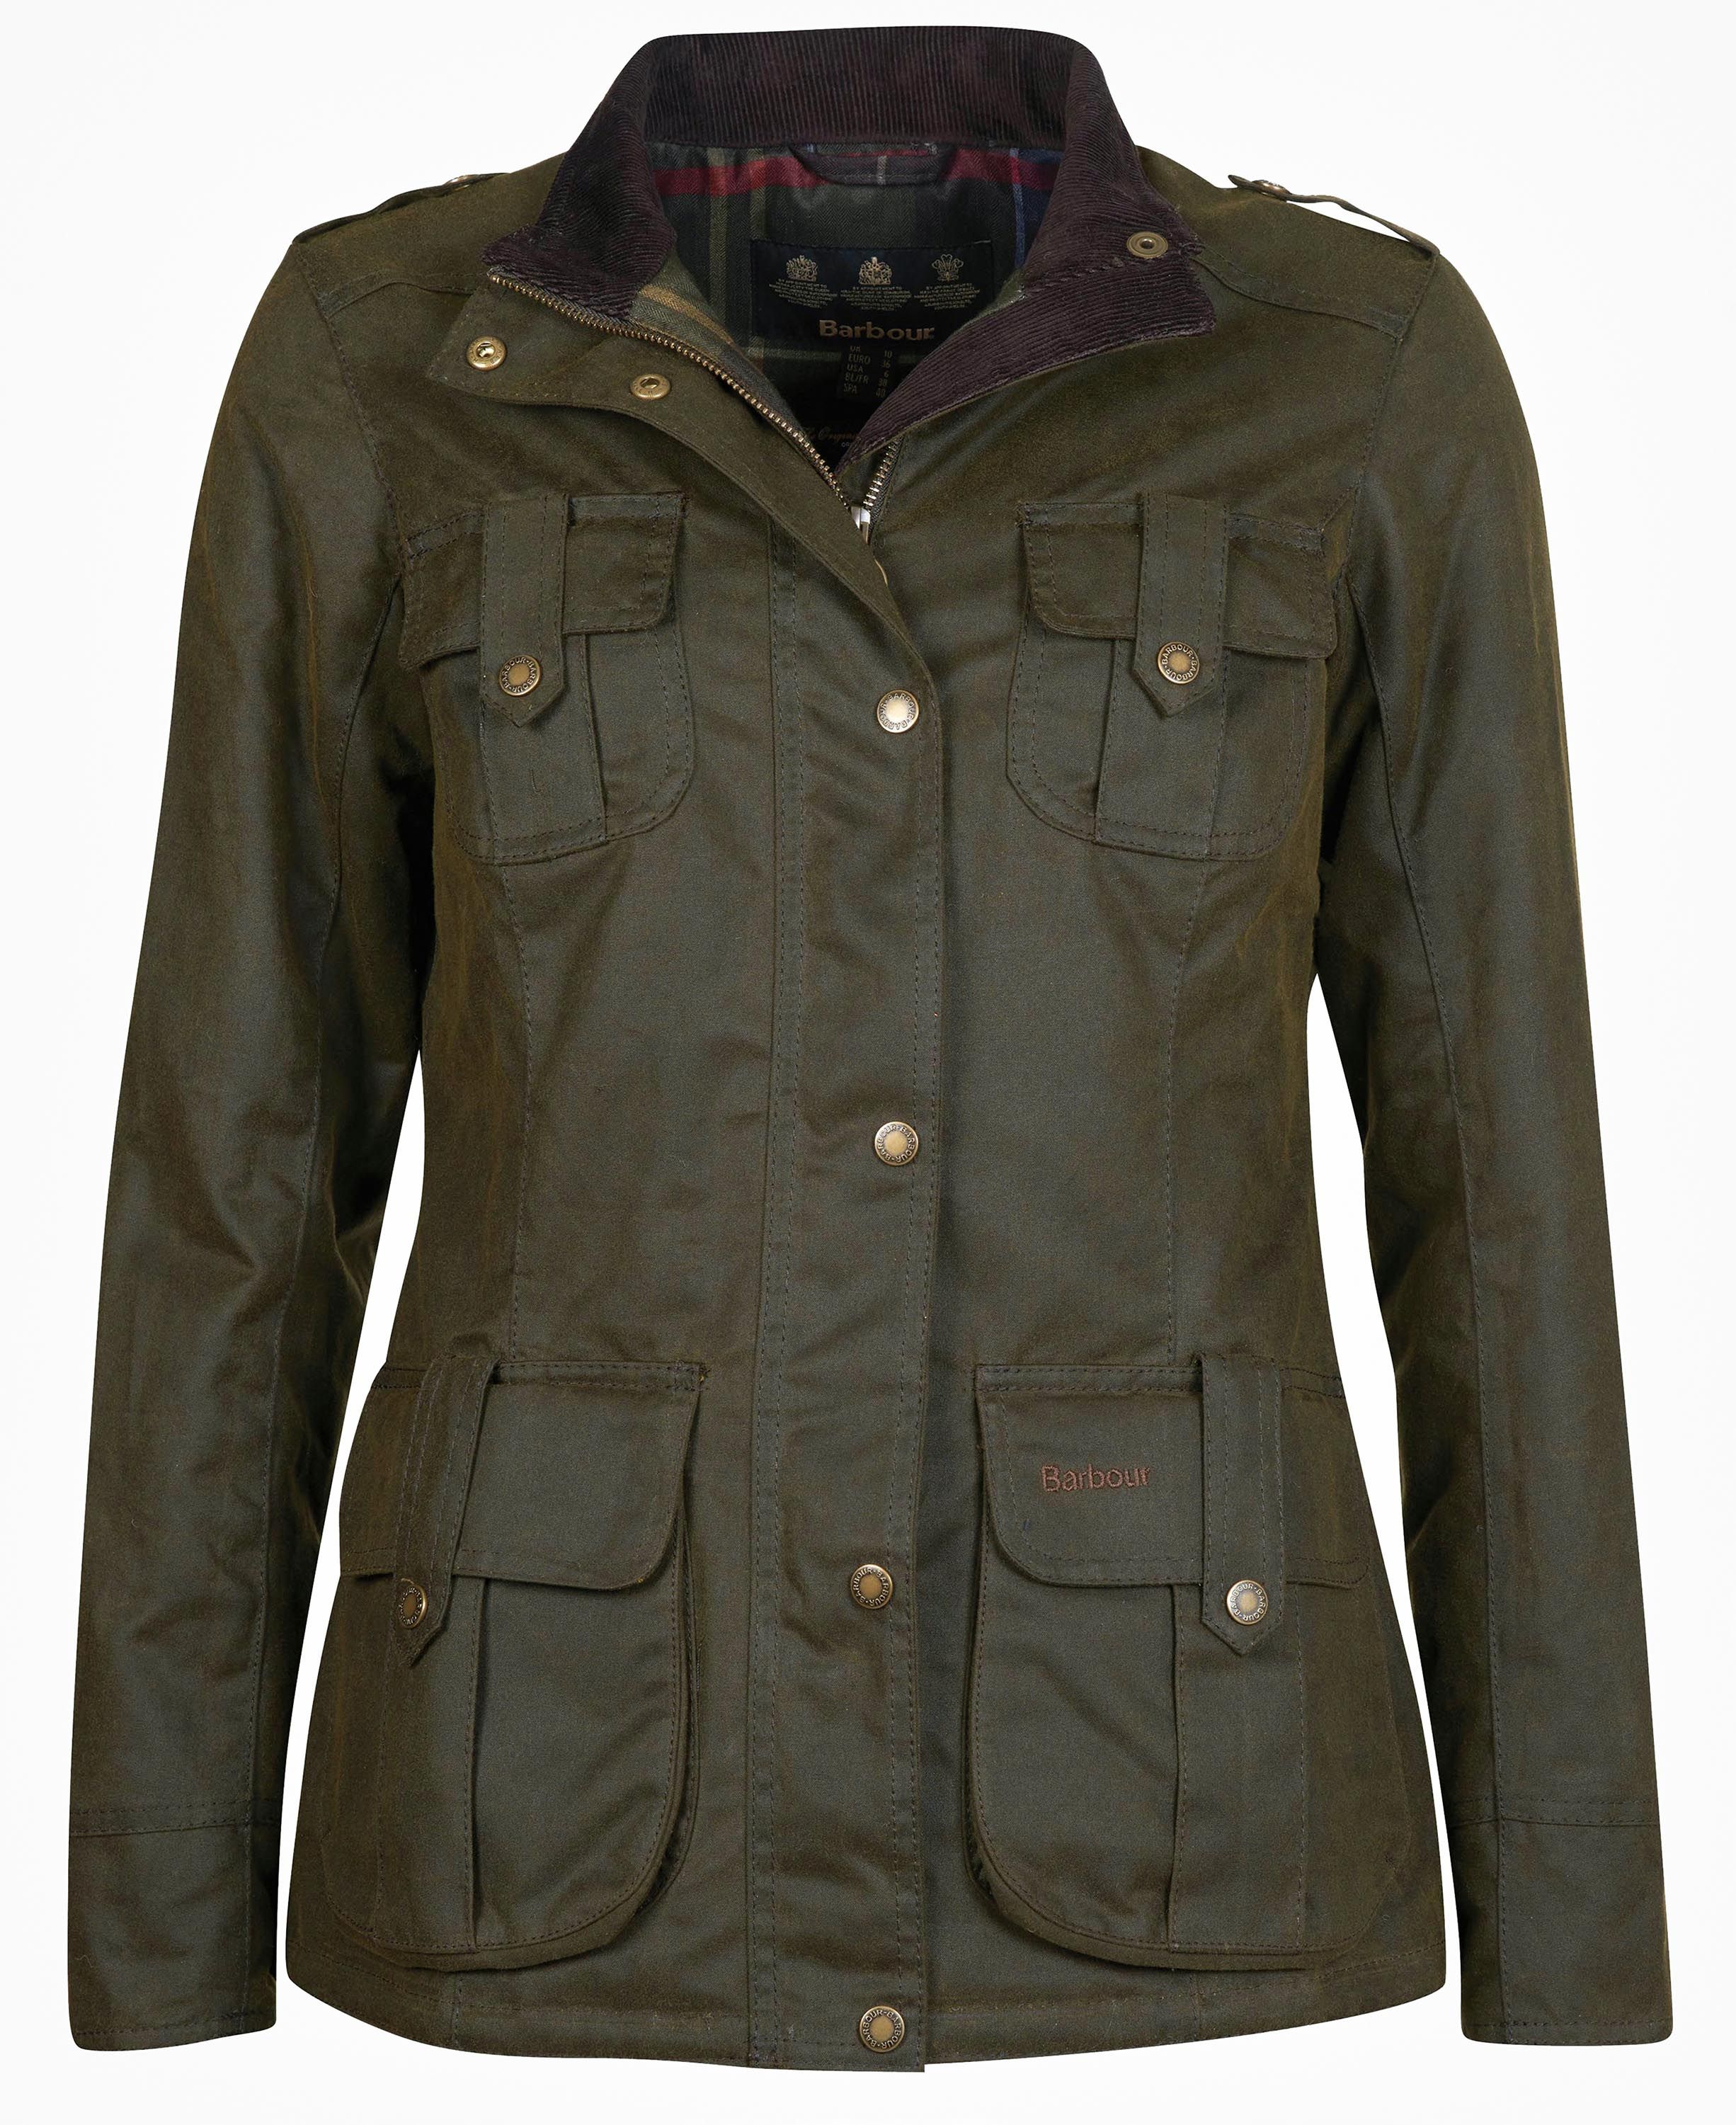 Barbour Winter Defence Waxed Cotton Jacket - Olive